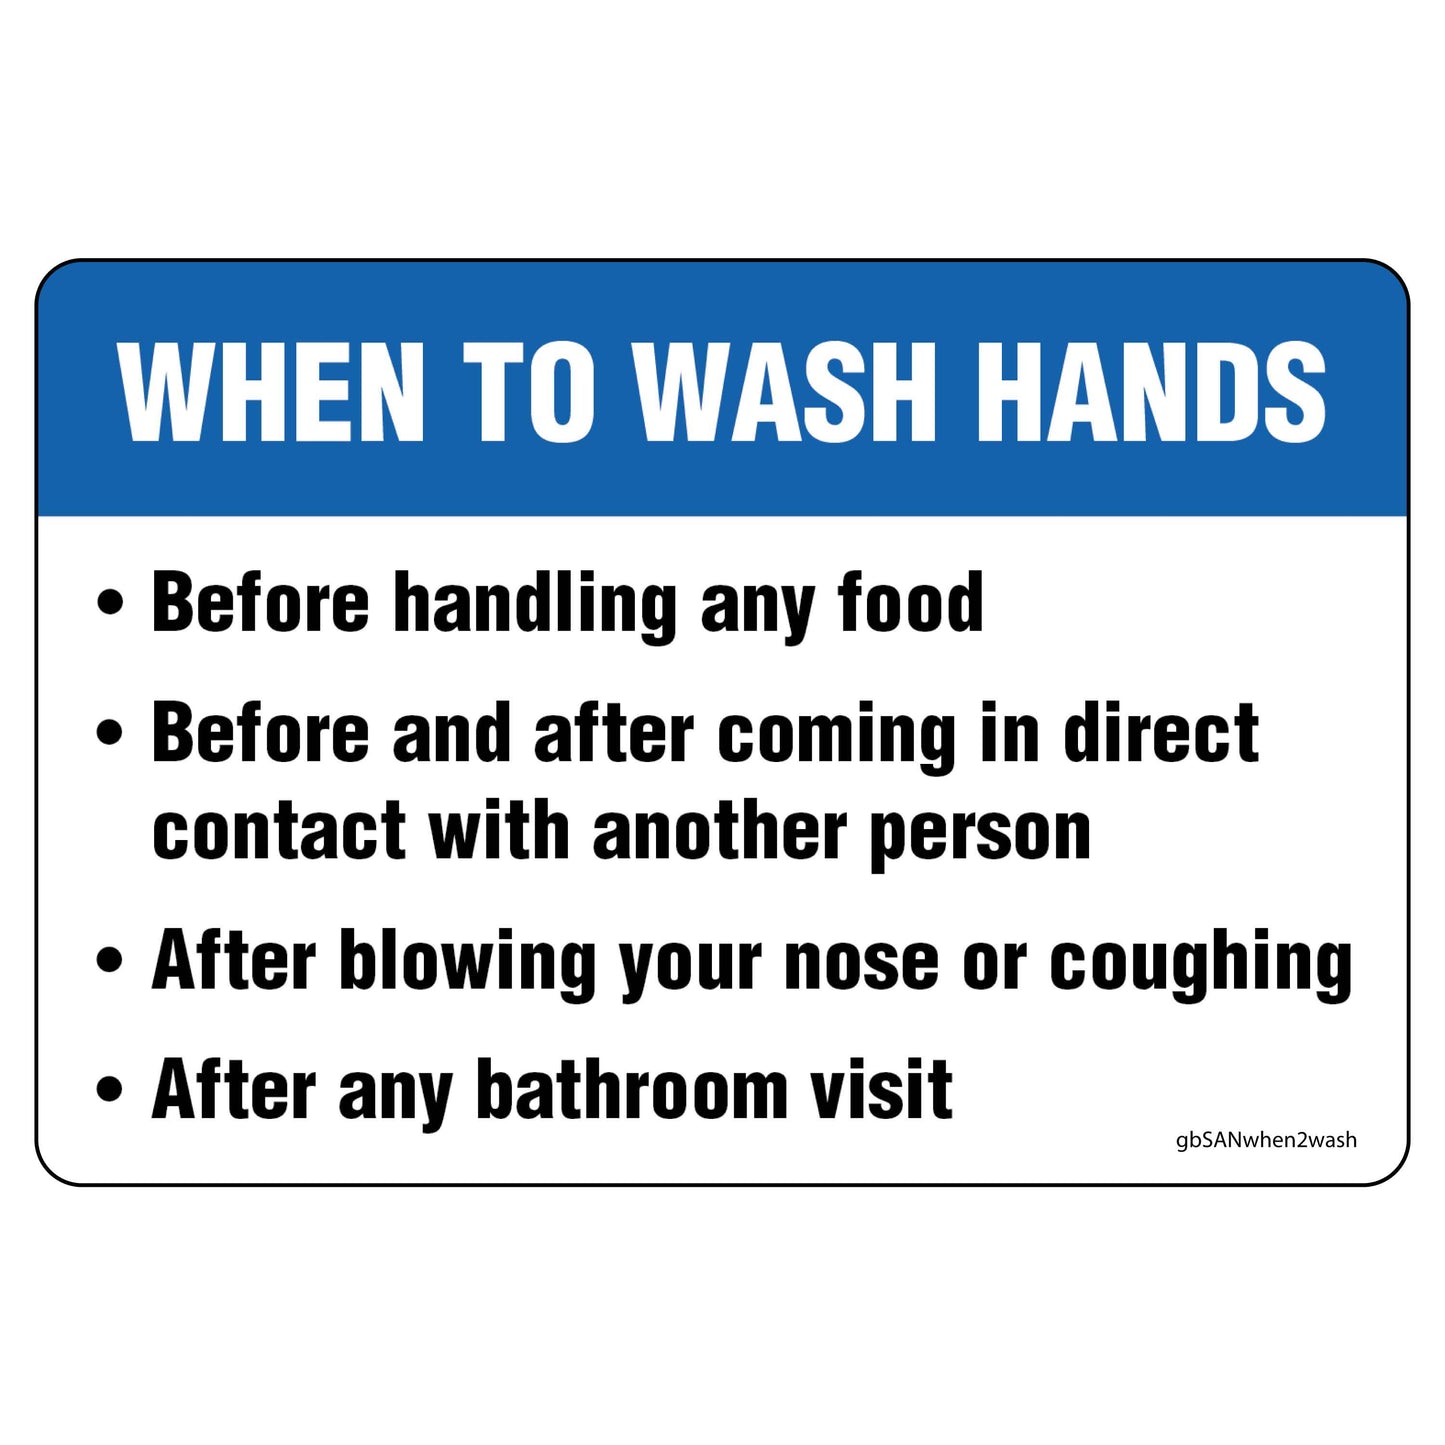 When to Wash Your Hands Decal. 3 inces by 5 inches in size.